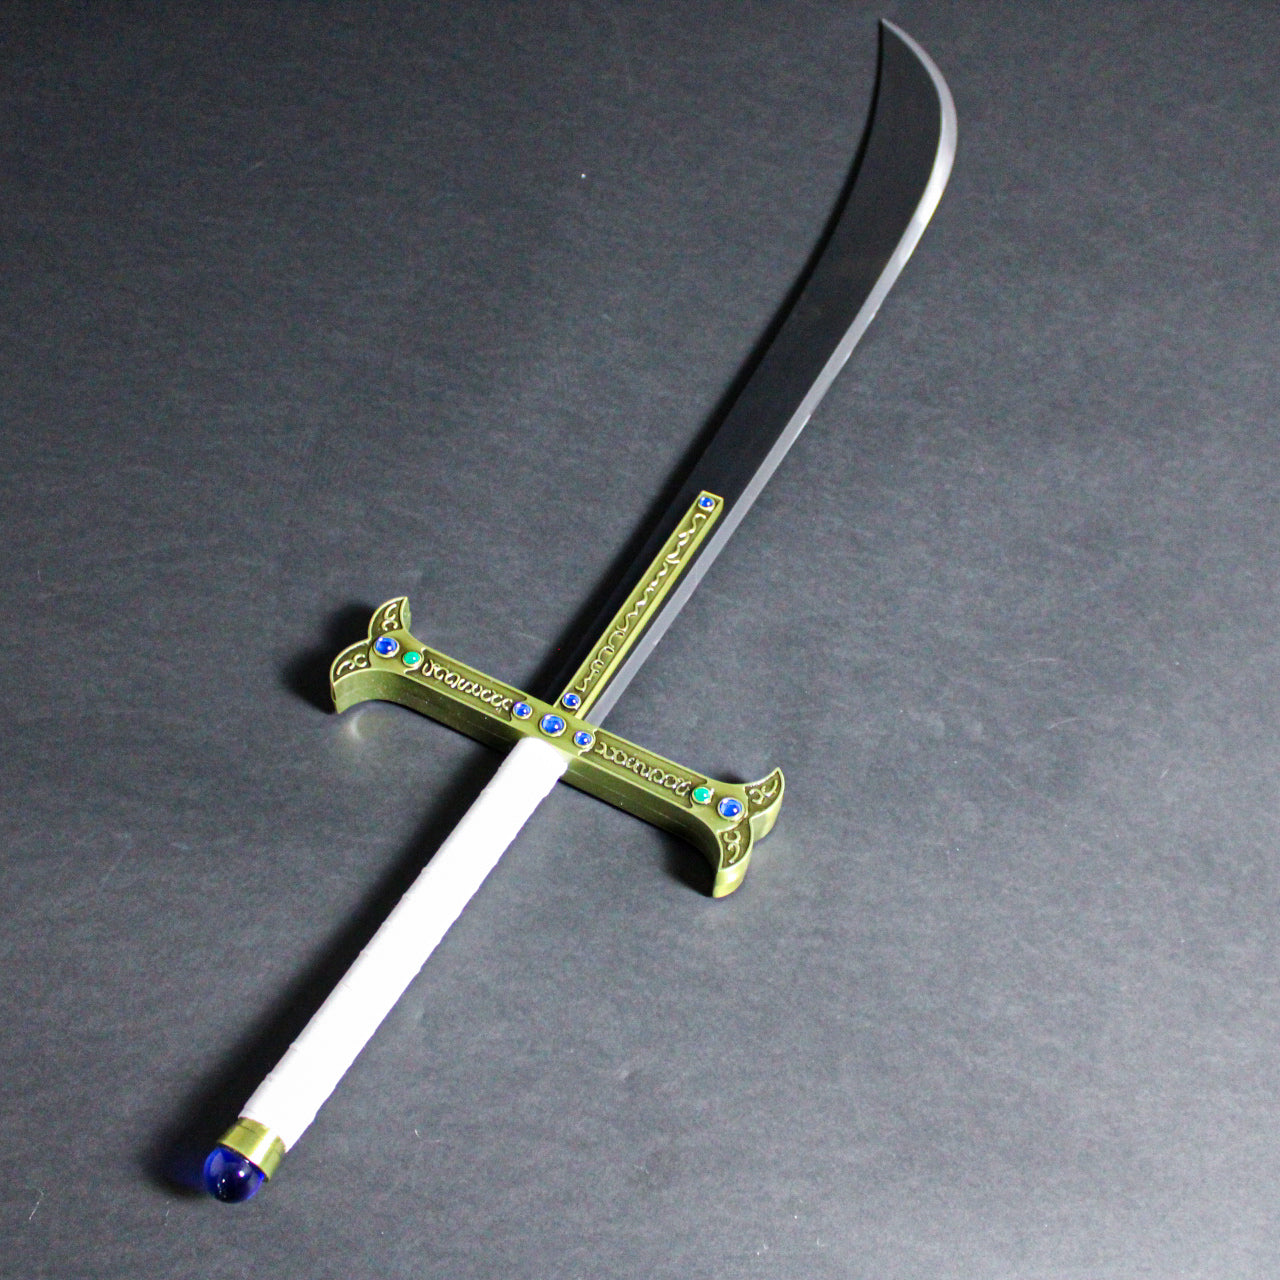 How to make a sword out of paper ❘ One Piece ❘ Yoru, Mihawk's Sword 